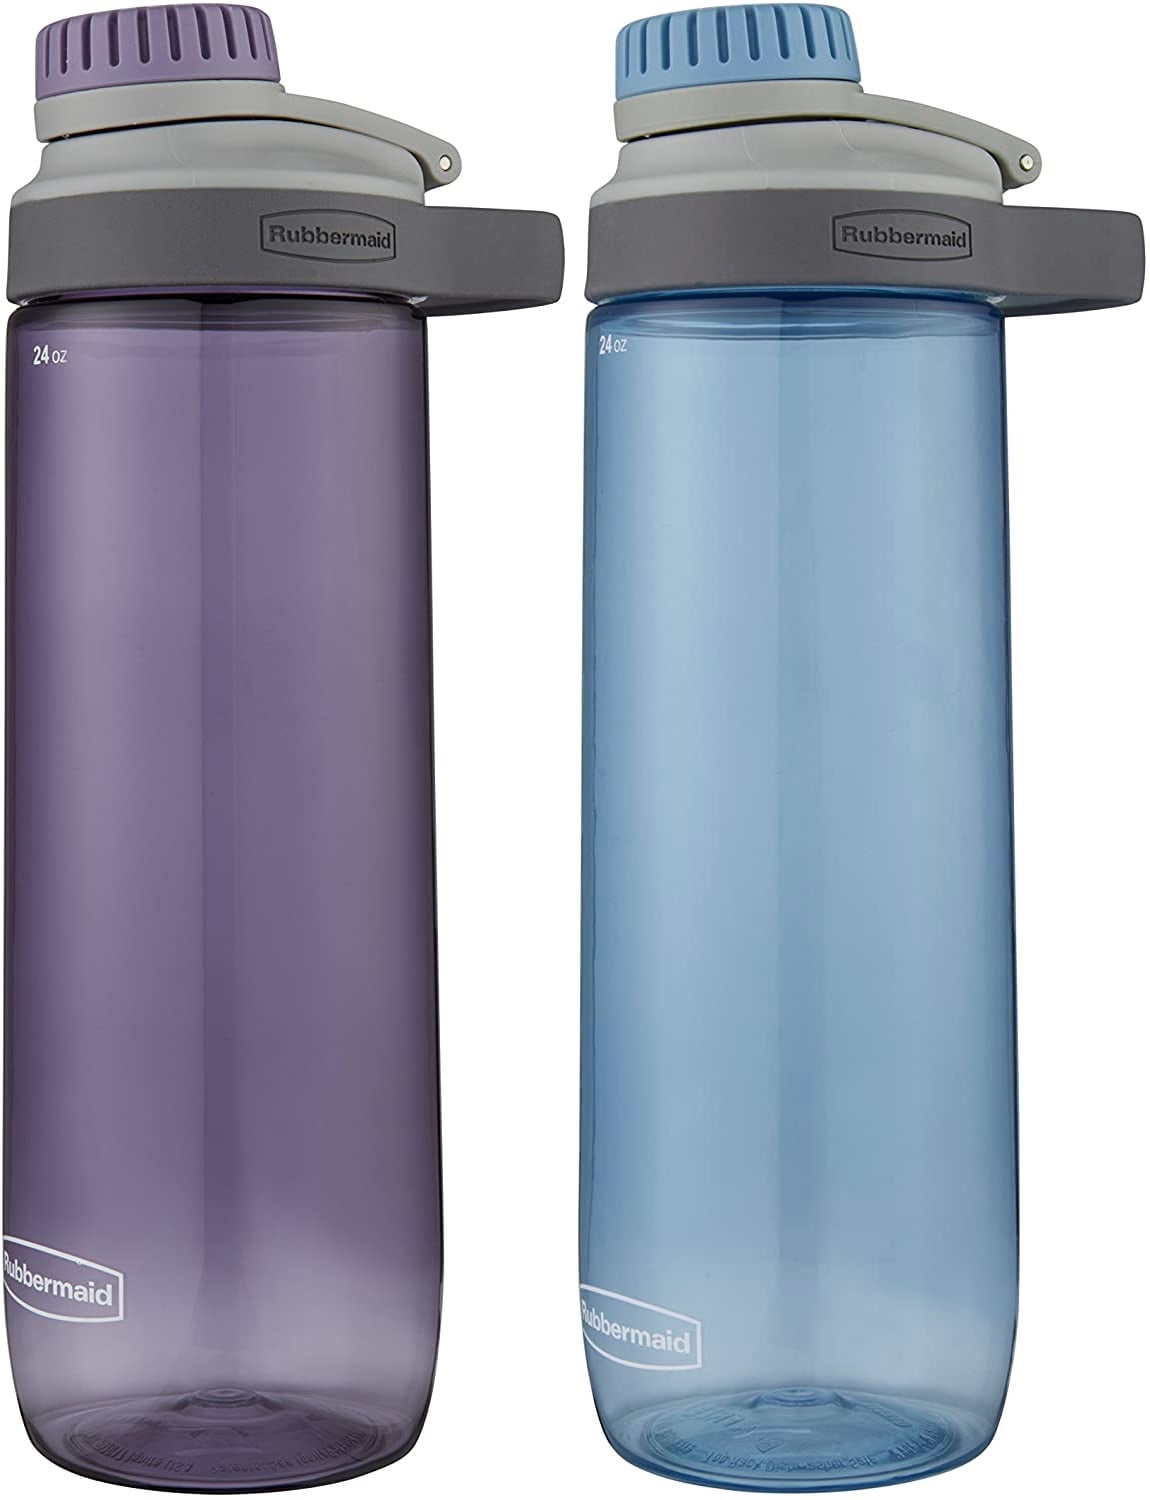 Rubbermaid 24 oz Blue and Purple Plastic Water Bottle with Wide